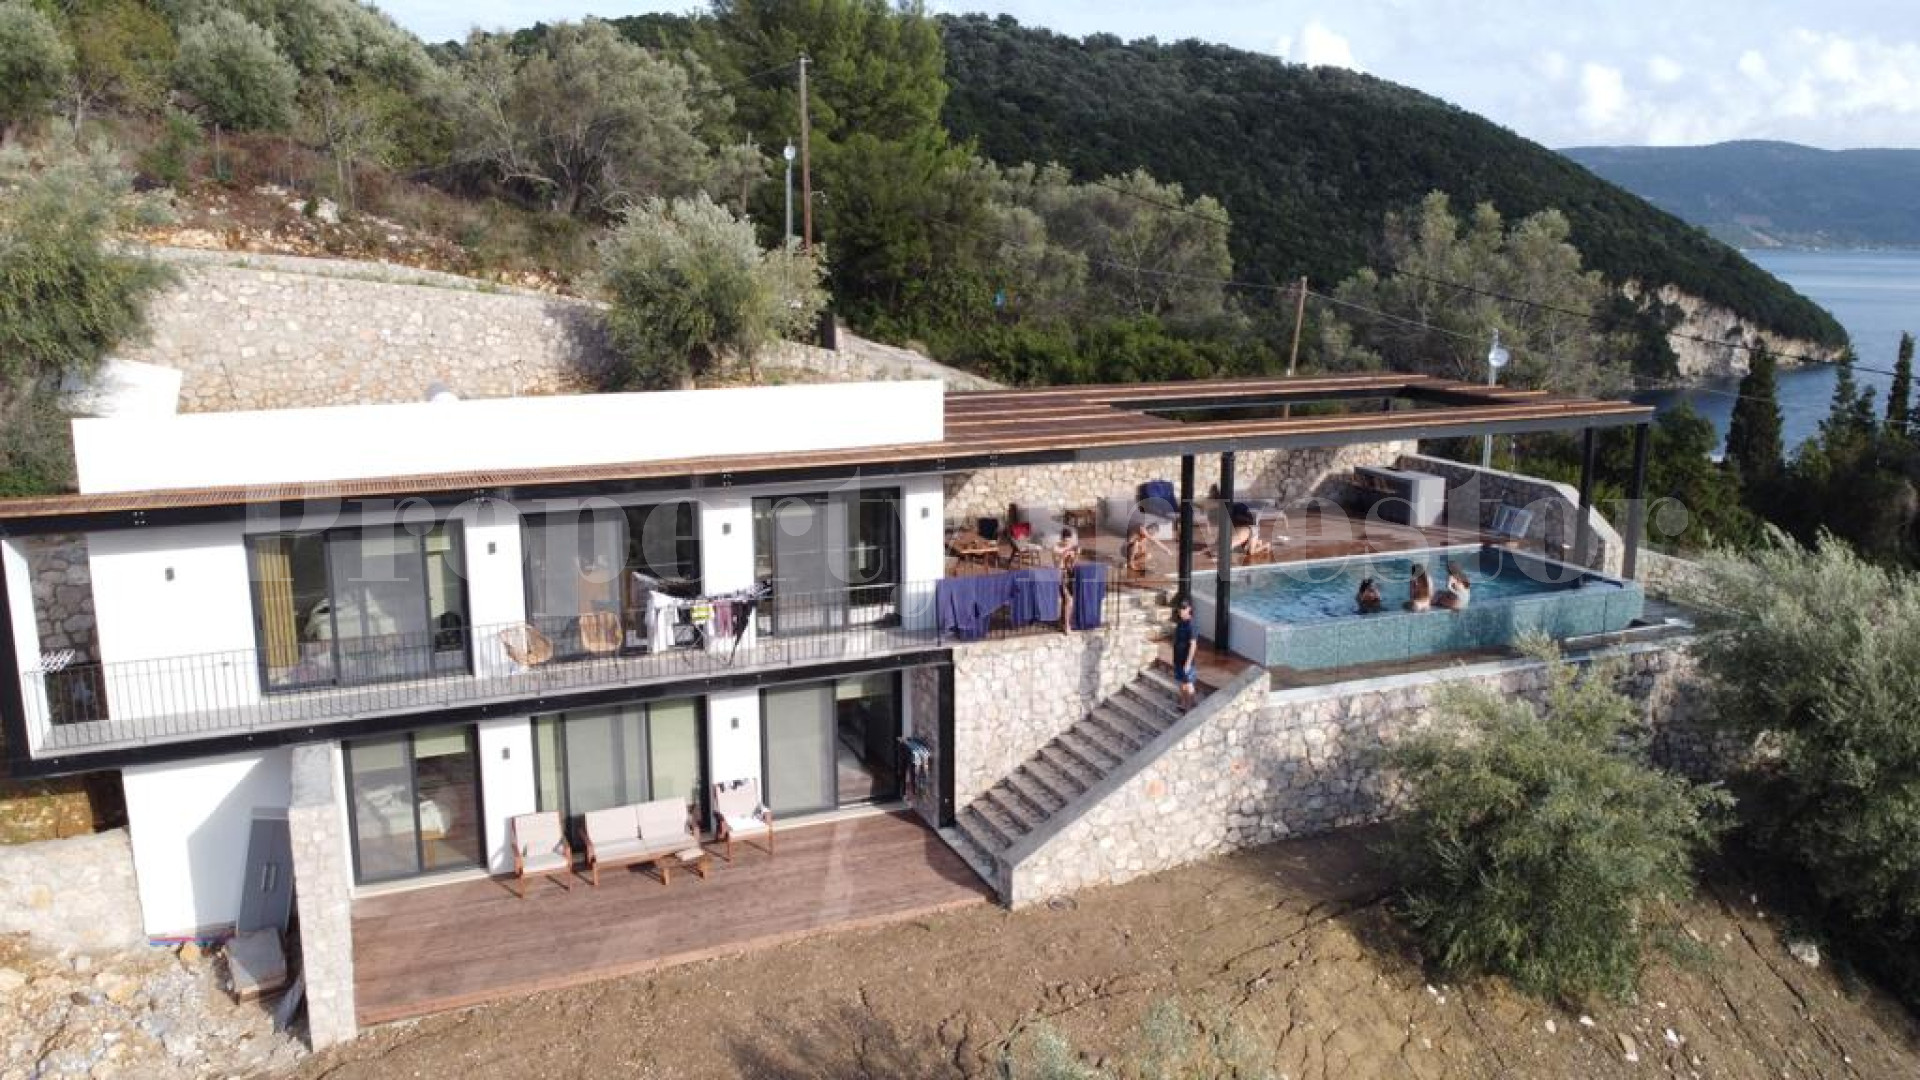 Brand New 4 Bedroom Luxury Villa with Breathtaking Panoramic Views for Sale on Lefkada Island, Greece